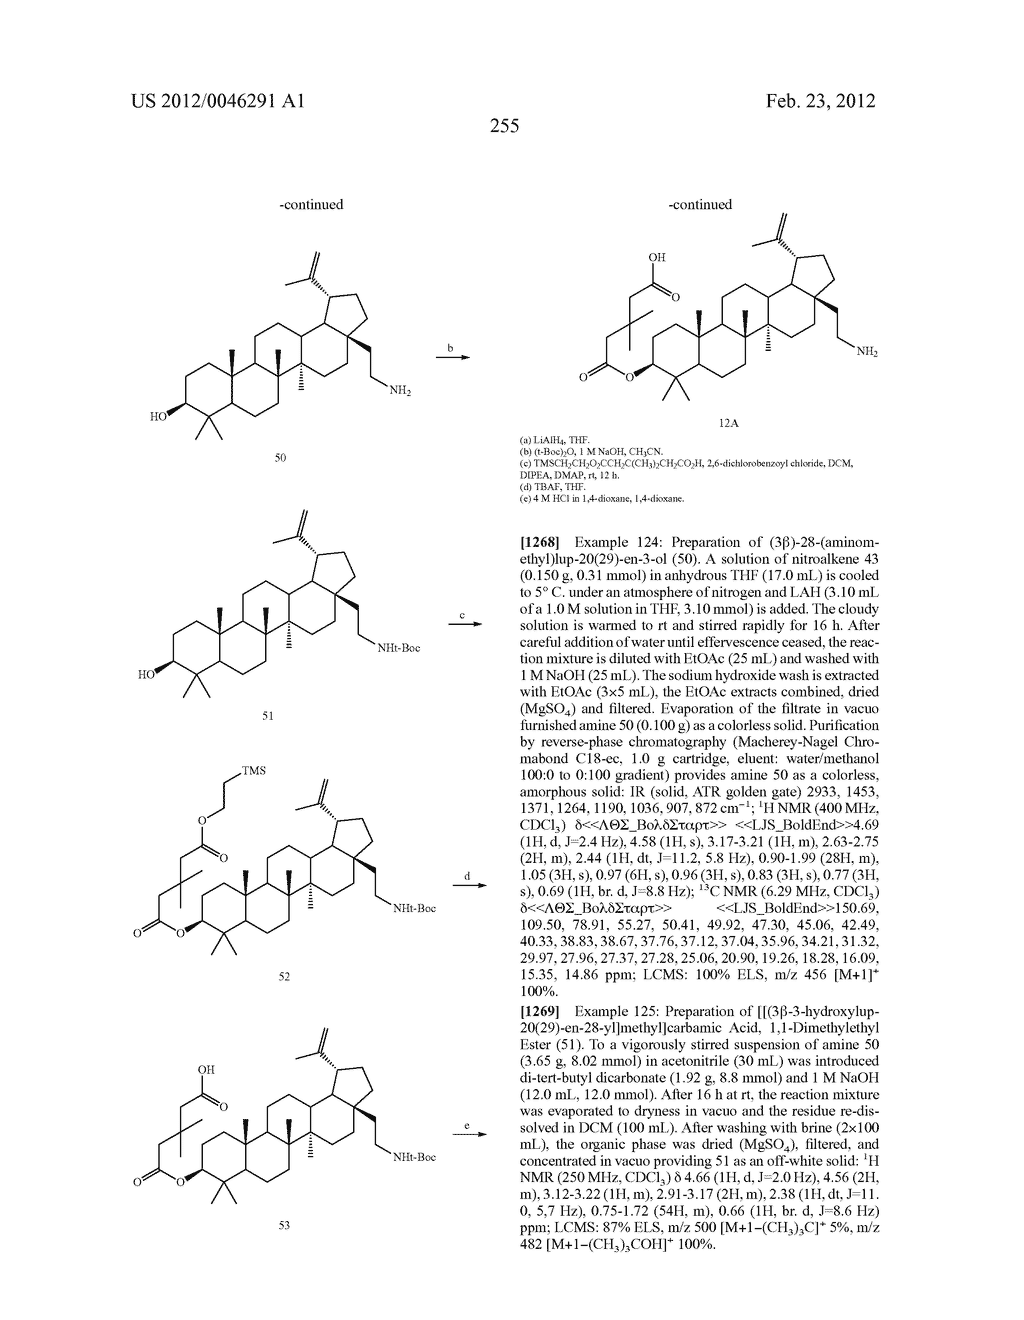 Extended Triterpene Derivatives - diagram, schematic, and image 255